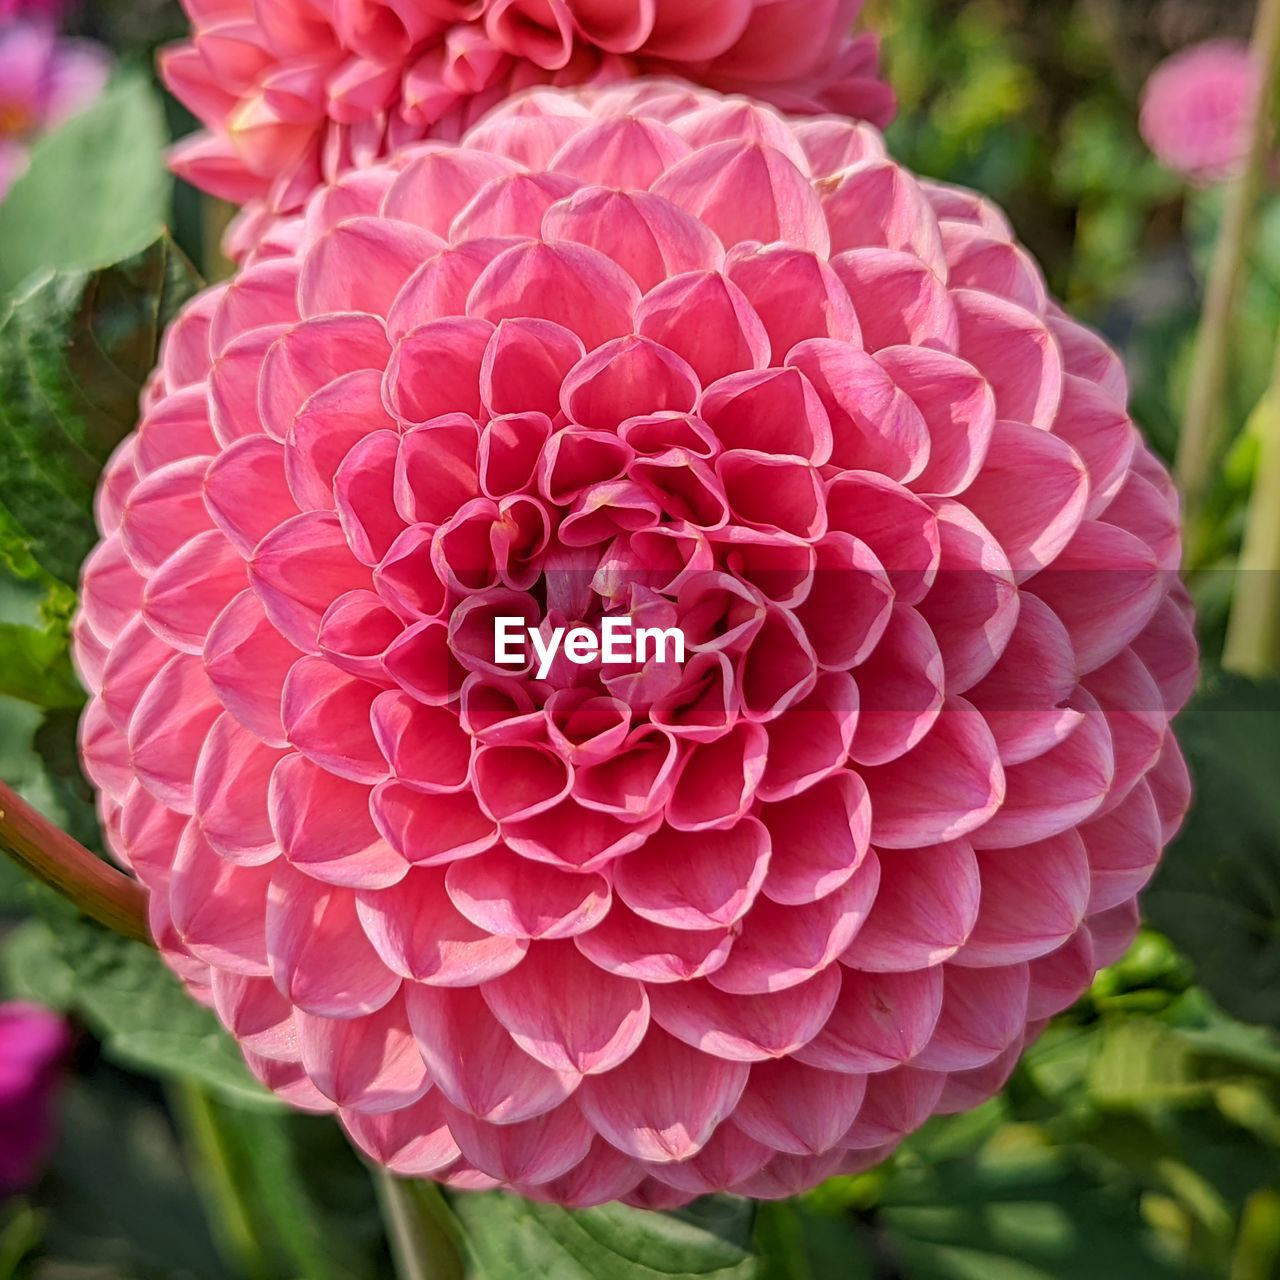 flower, flowering plant, plant, beauty in nature, petal, close-up, freshness, flower head, inflorescence, growth, fragility, pink, nature, dahlia, no people, focus on foreground, red, day, outdoors, plant part, leaf, springtime